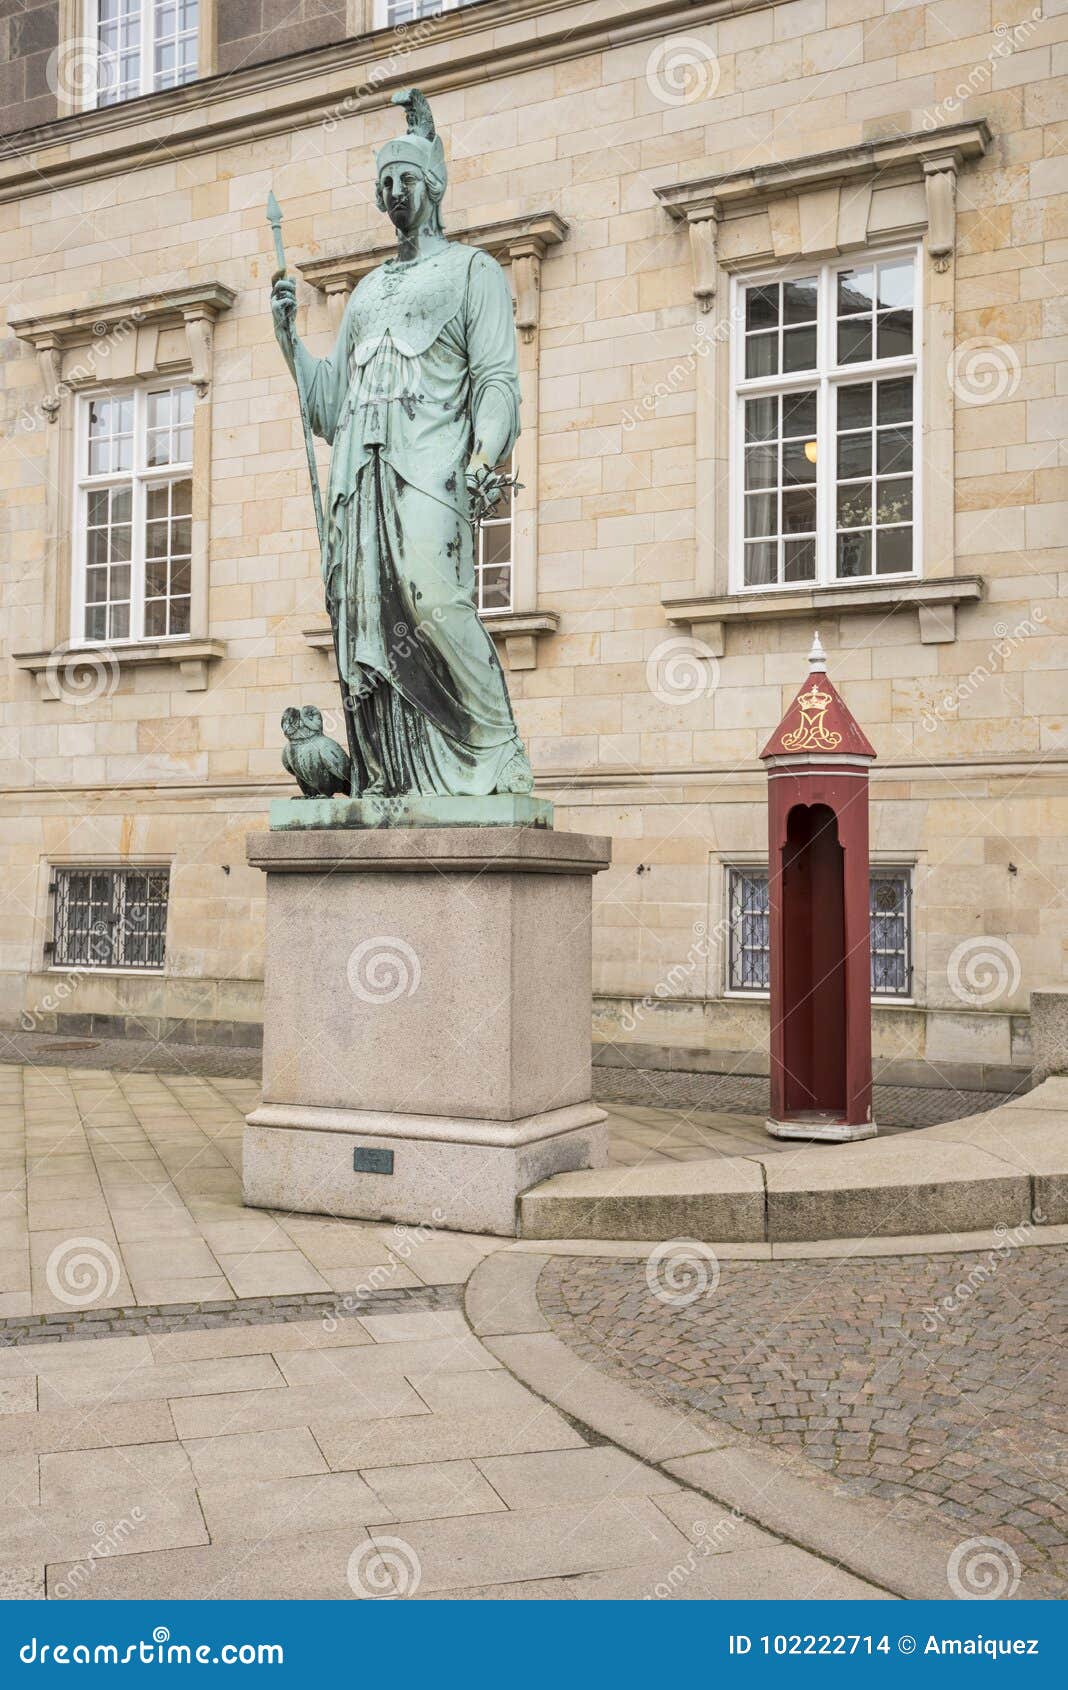 Christiansborg palace editorial stock image. Image of spear - 102222714